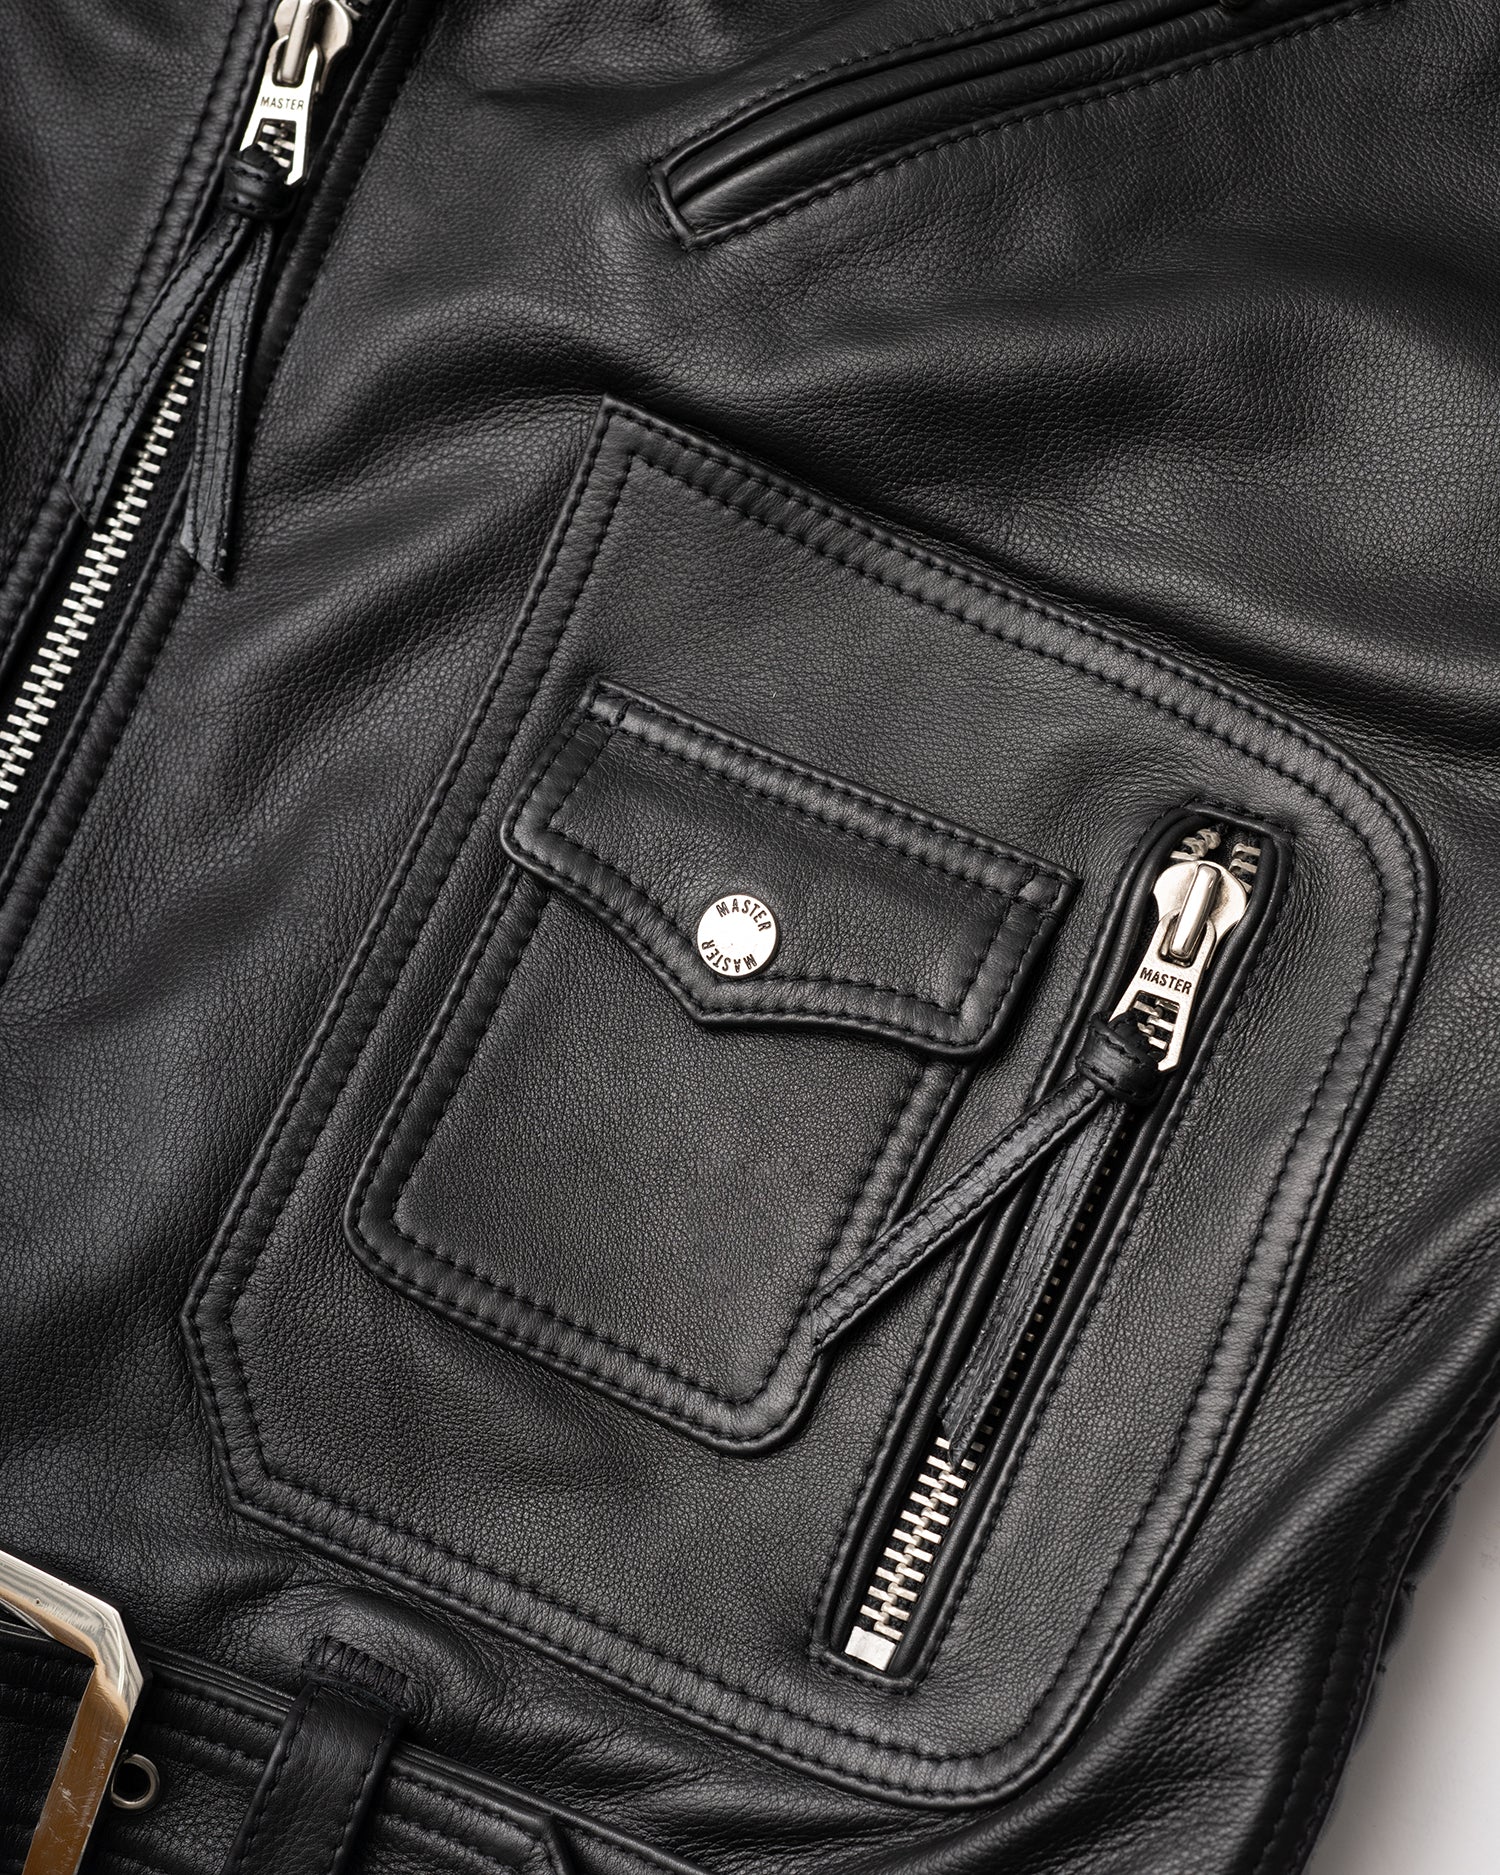 The Belvedere: Reload - A Rugged, Stylish Leather Jacket for the ...